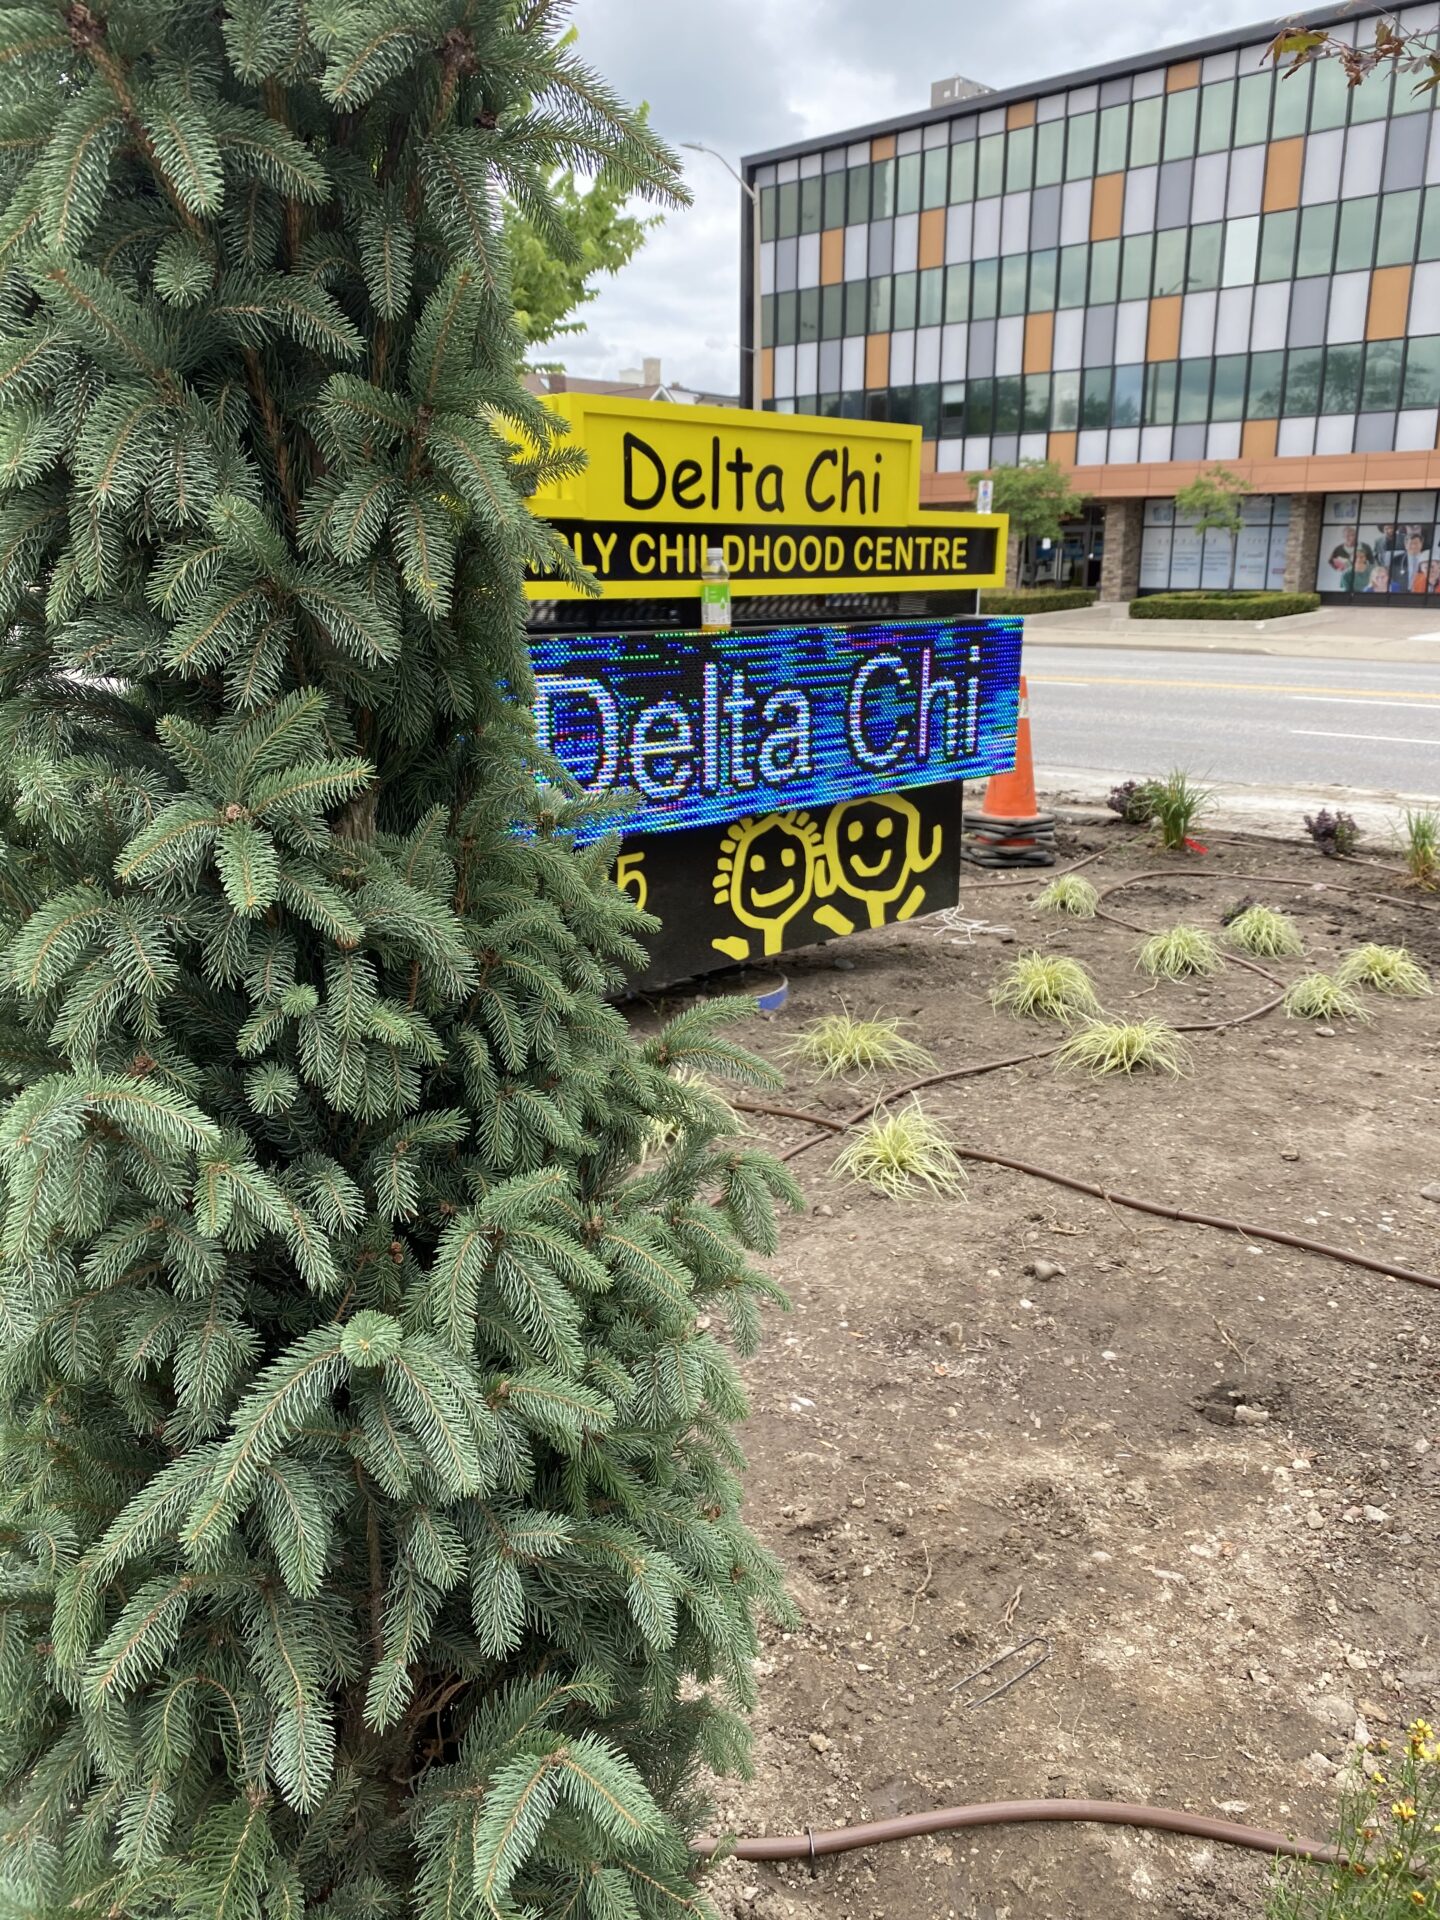 This image shows a sign for Delta Chi Early Childhood Centre, with LED display and smiley faces, in front of a building beside a conifer tree.